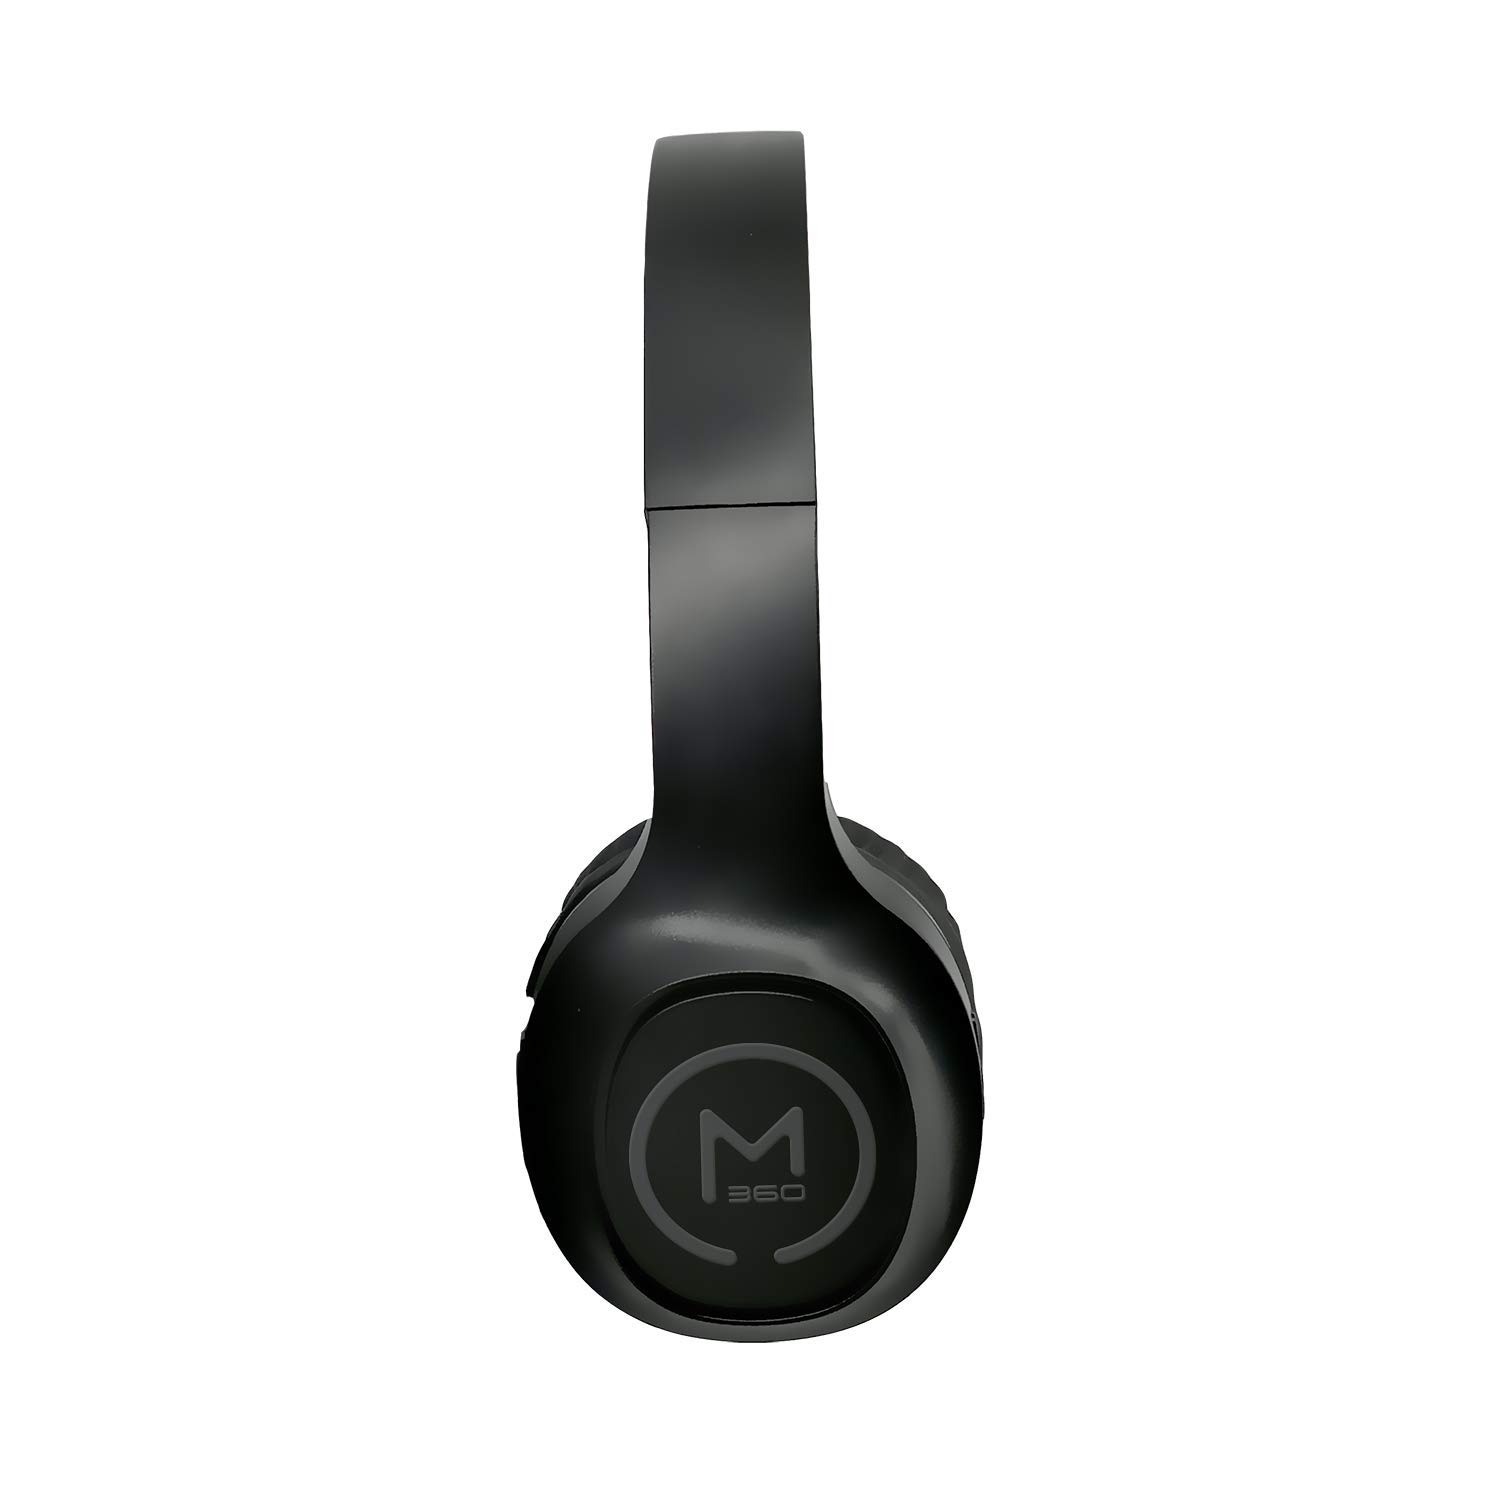 Morpheus 360 Tremors Bluetooth Headphones with Built-in Microphone, One Touch Control, Wireless Headphones, Bluetooth Headset, Gaming Headphones, Over-Ear Headphones, Wireless Gaming Headset - HP4500B